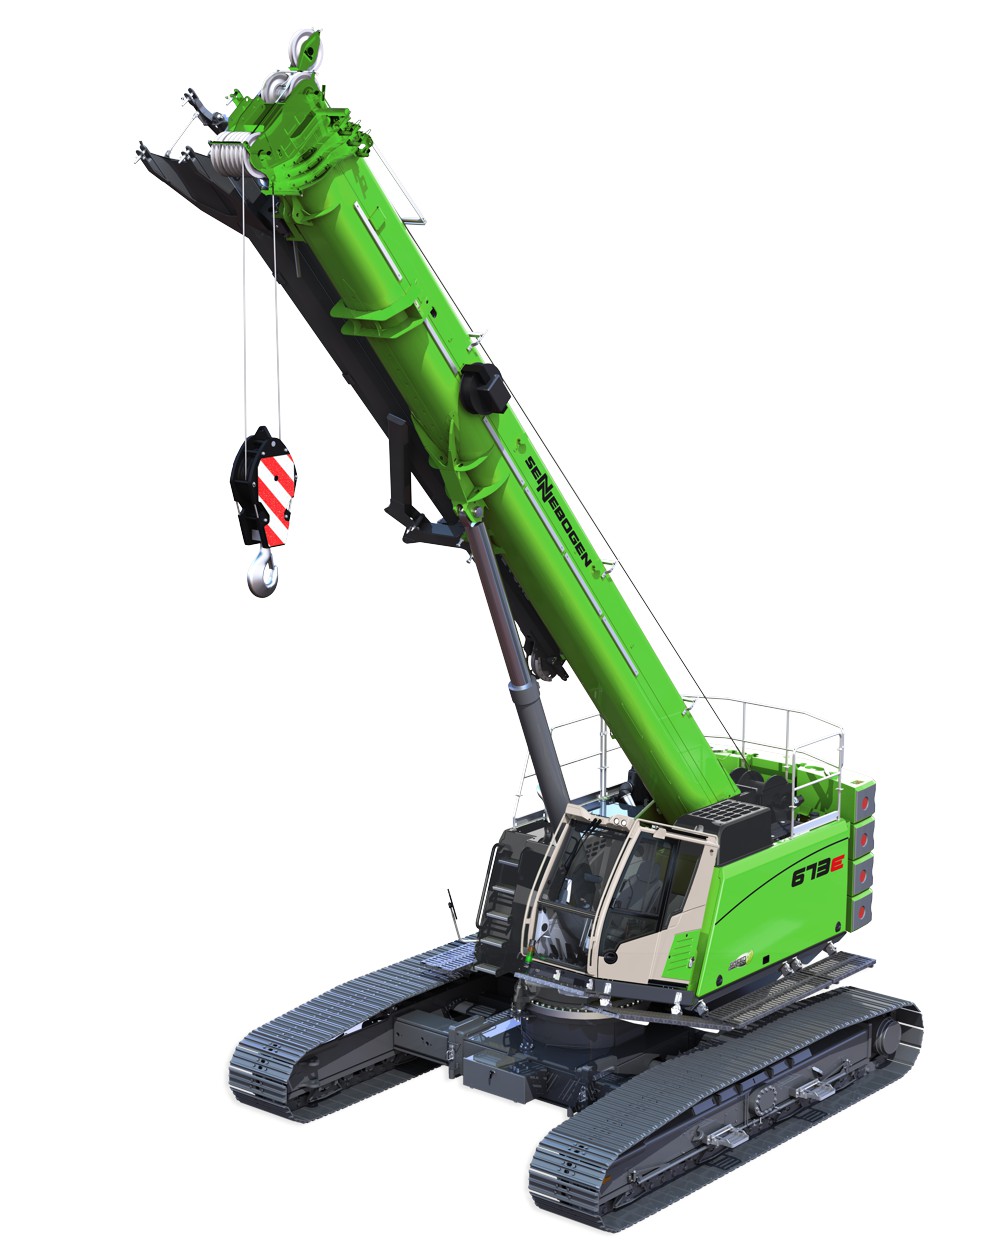 The SENNEBOGEN 673 R-HD crane has been a favorite among customers all over the world for five years. Now the company is launching an updated model with new features that really make a difference. Because there is always room for improvement.